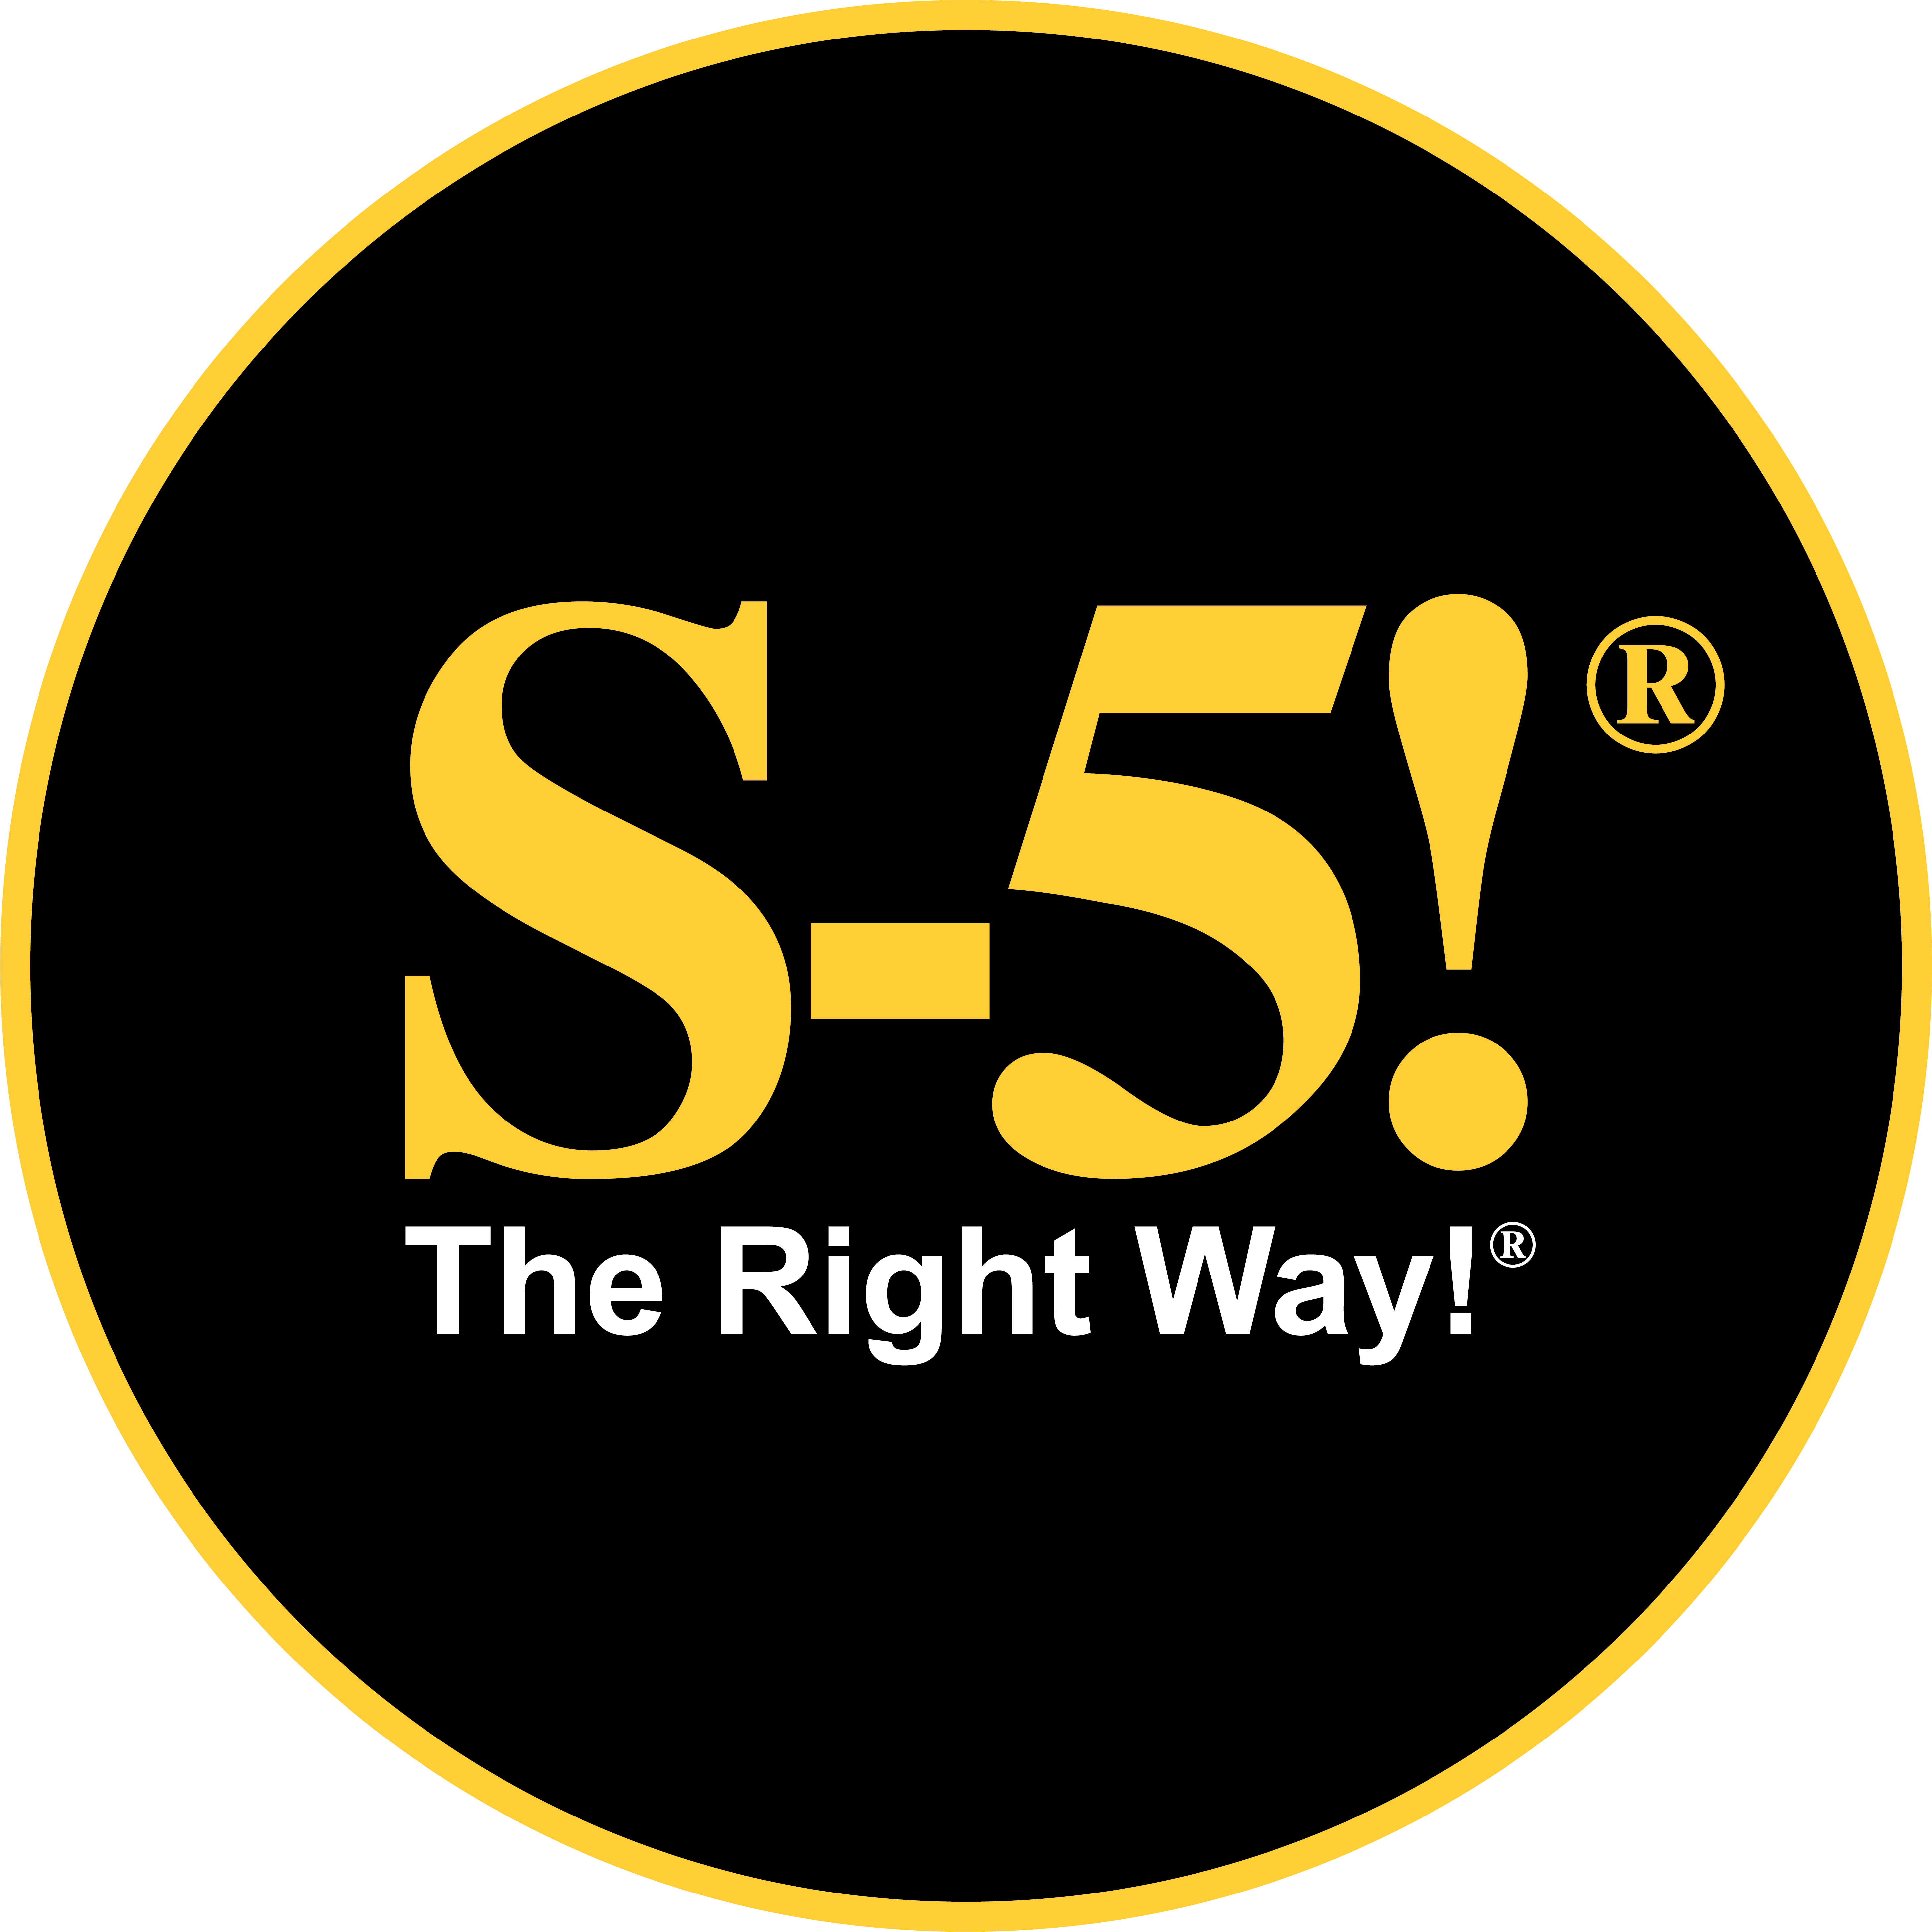 S-5® The Right Way® Black and Yellow Logo